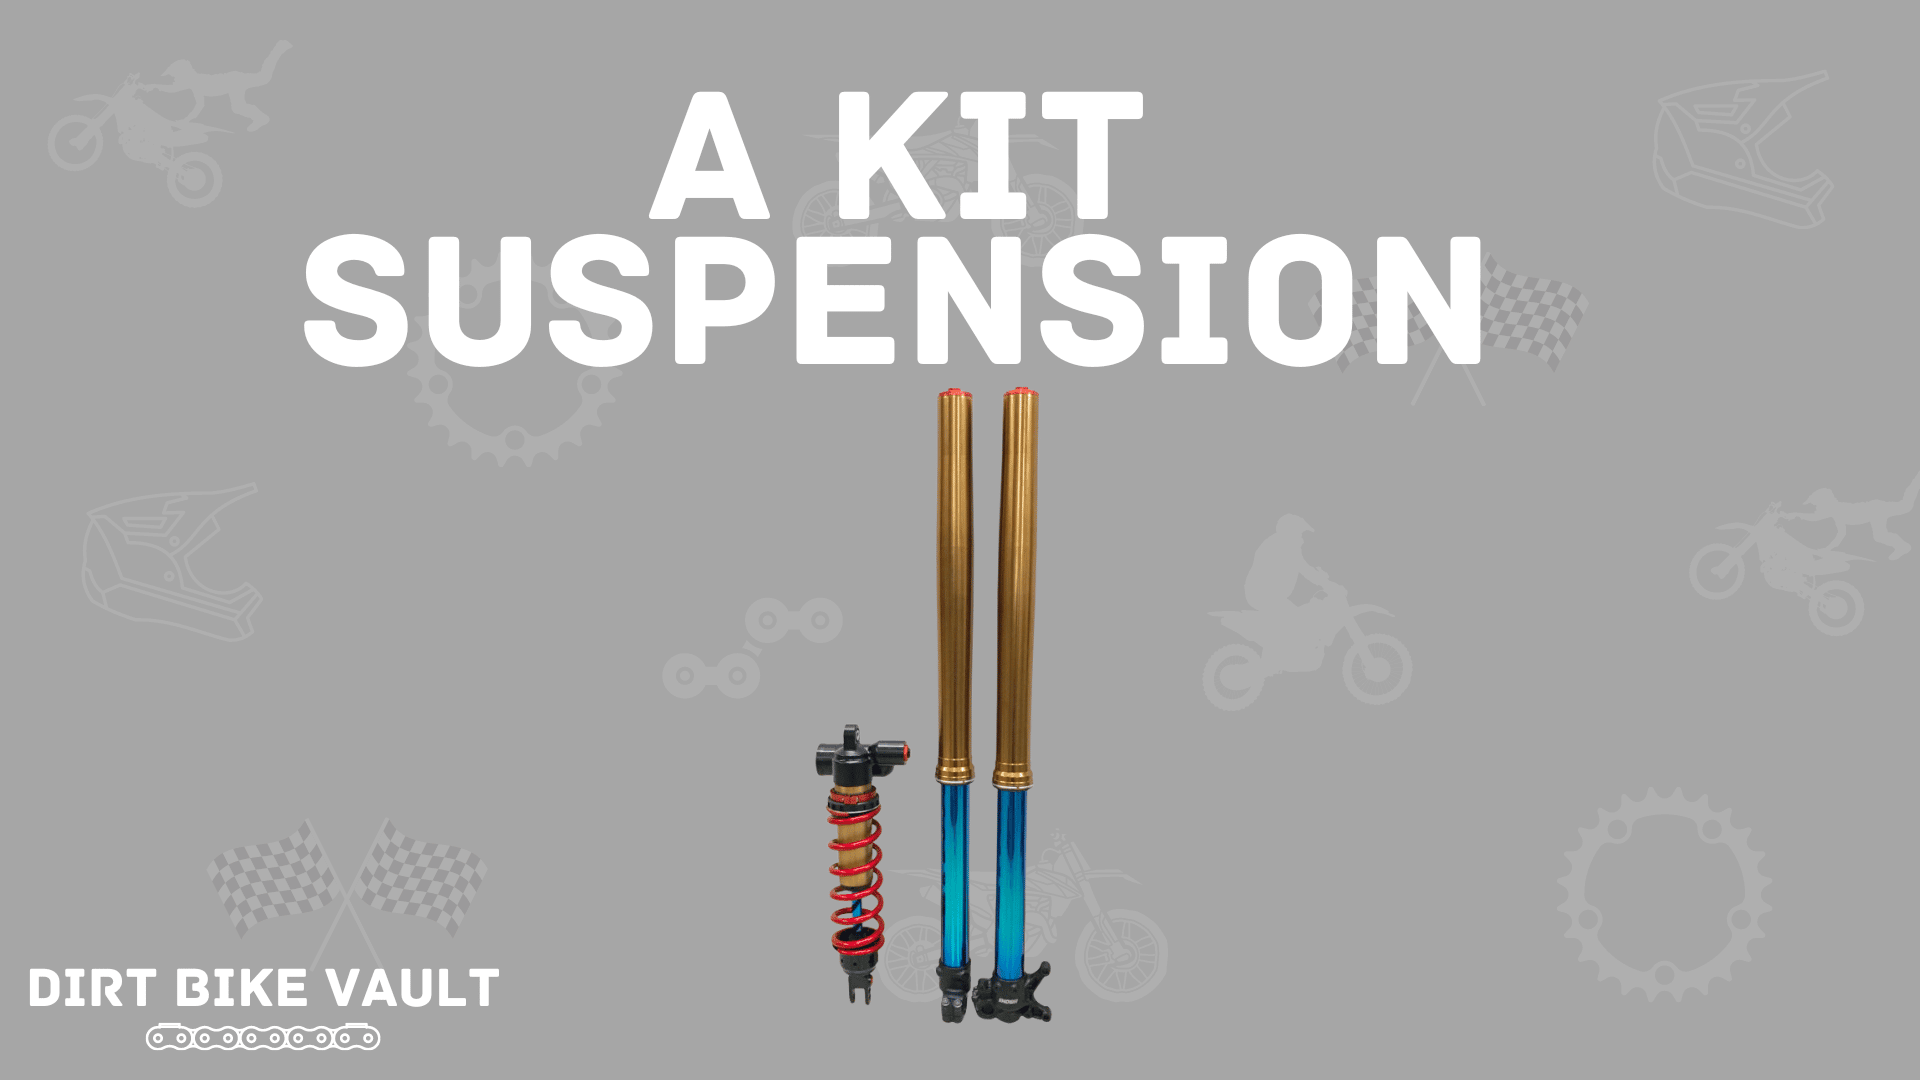 A kit suspension in white text on gray background with image of forks and rear shock